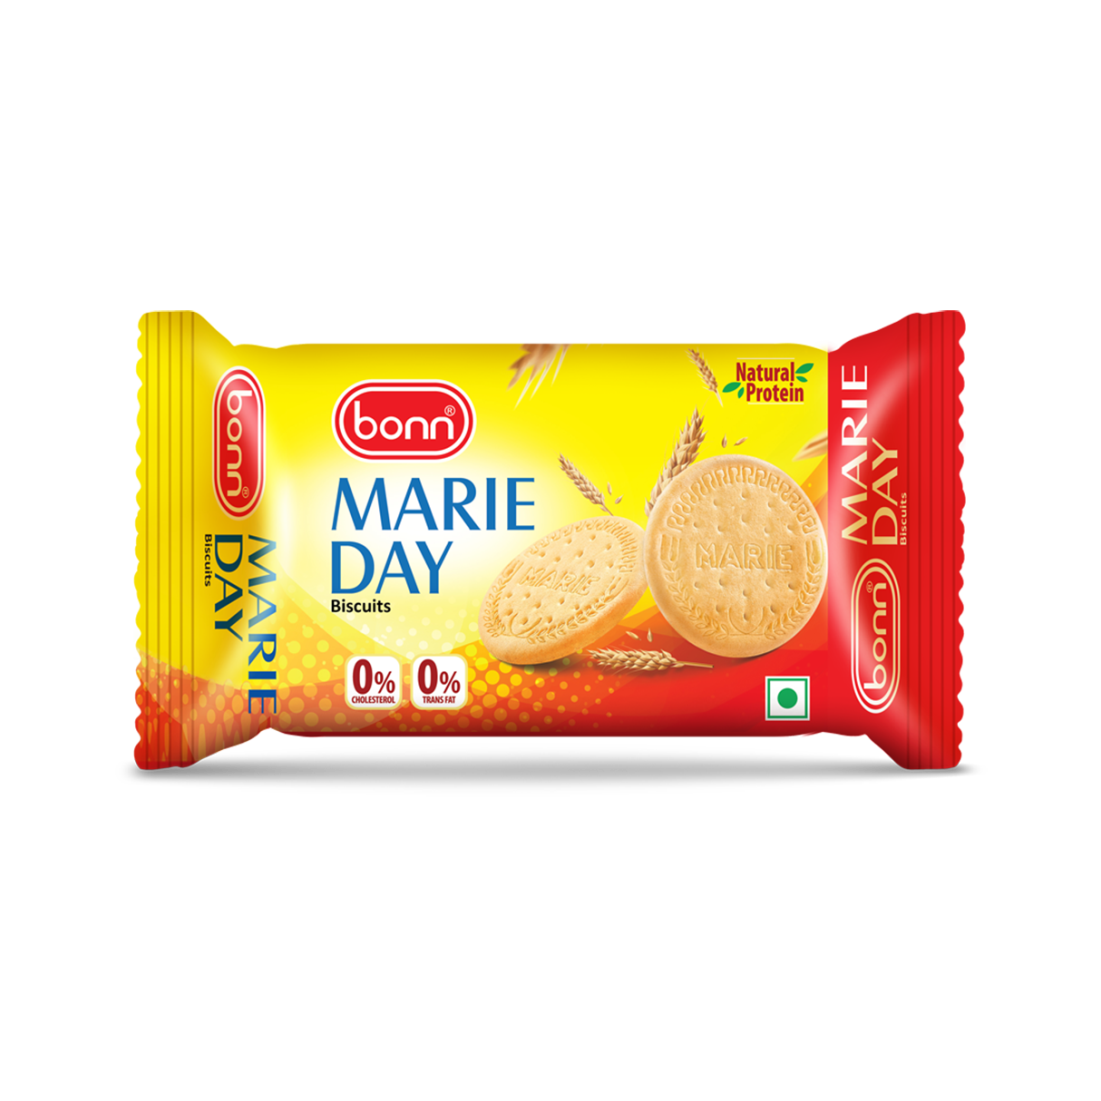 Bonn Marie Day Biscuits